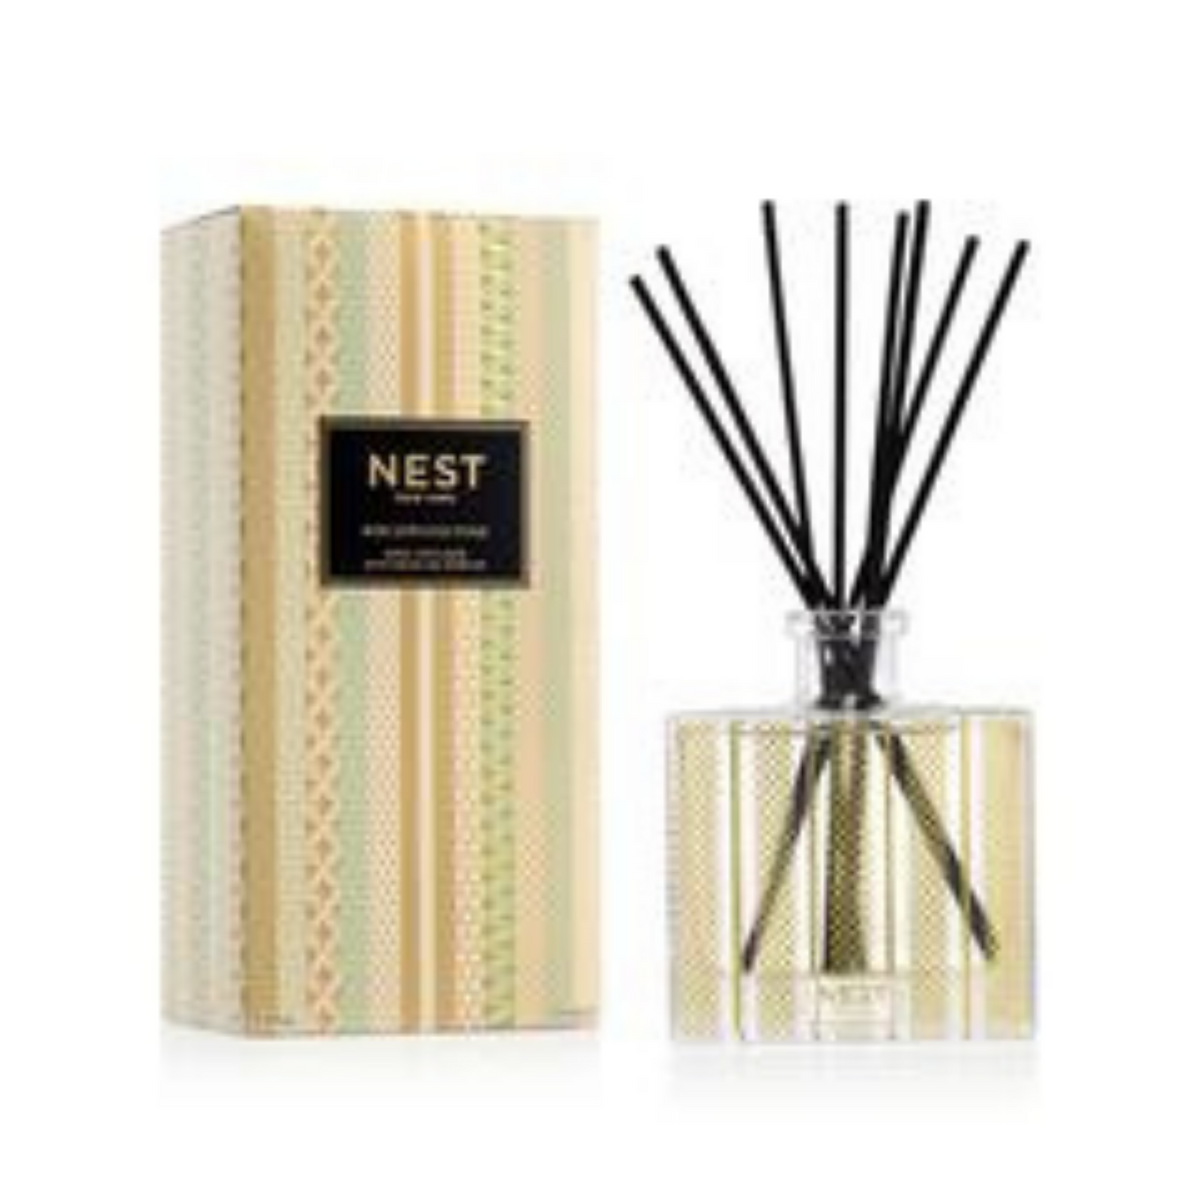 Primary Image of Birchwood Pine Reed Diffuser